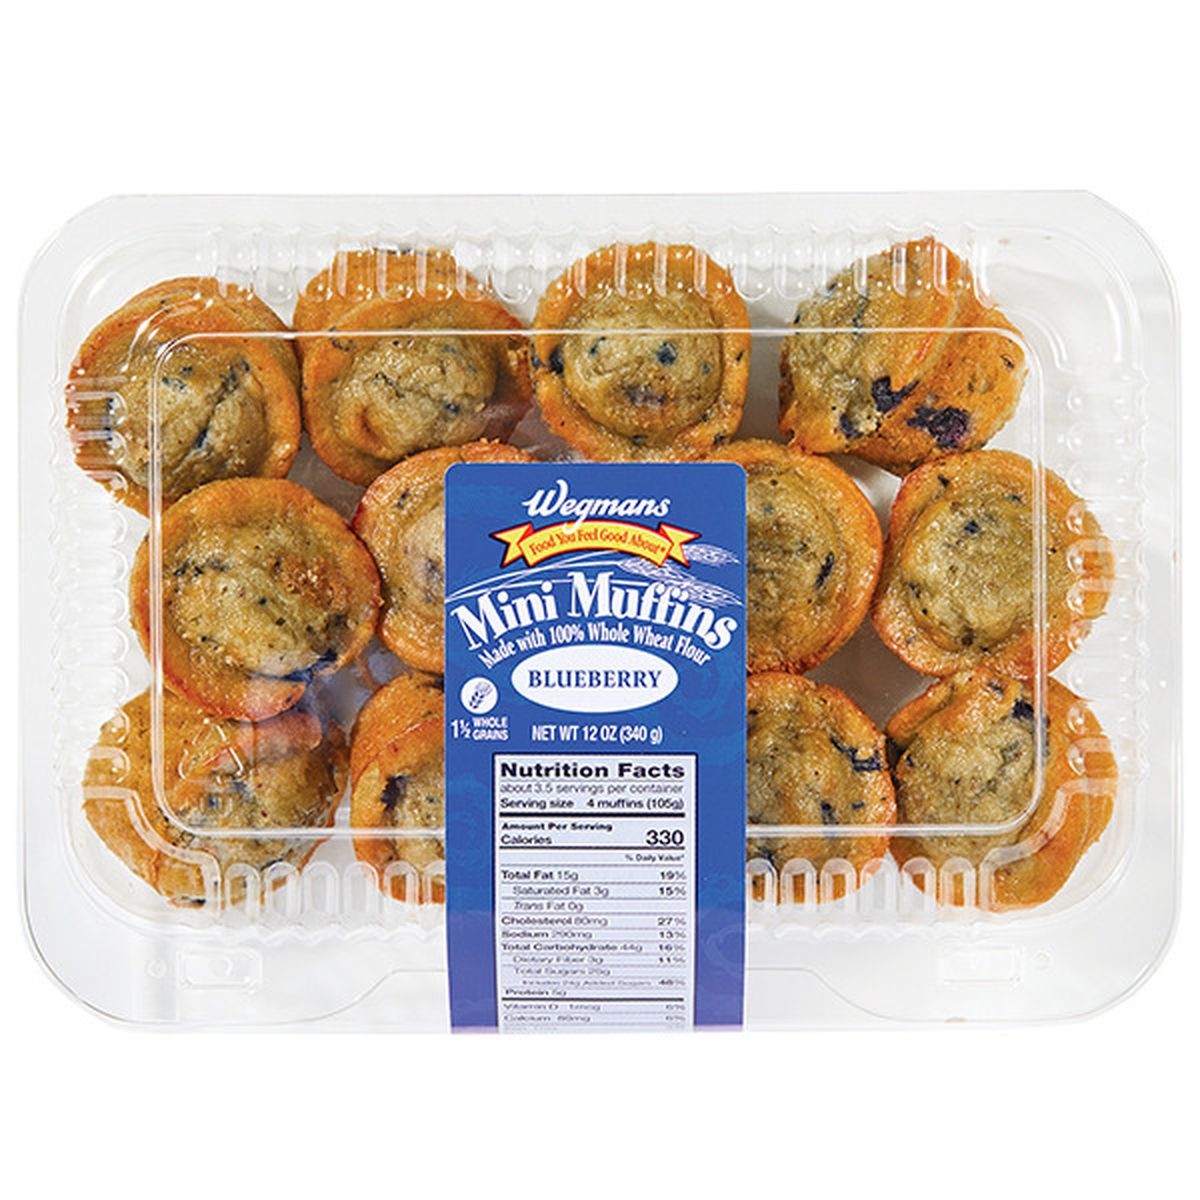 Calories in Wegmans Mini Blueberry Muffins Made with 100% Whole Wheat Flour